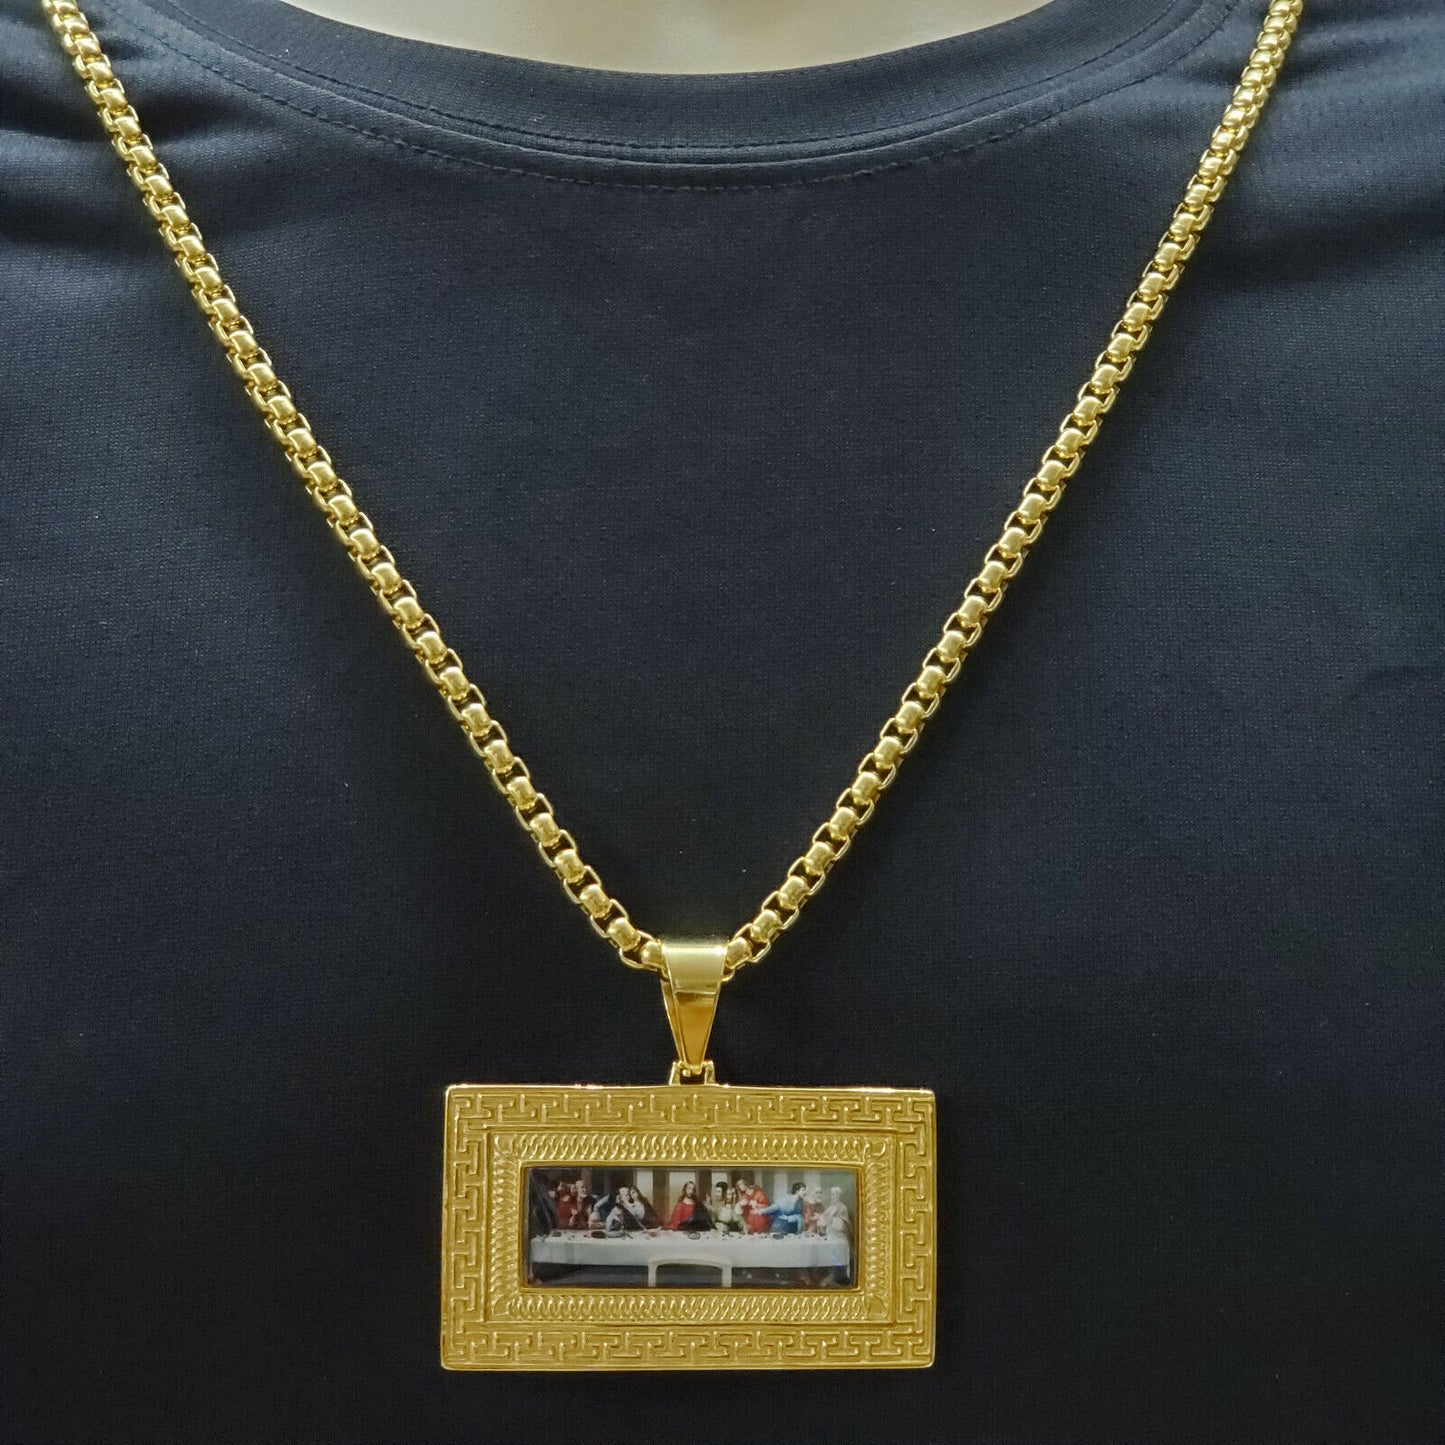 Necklaces - Stainless Steel Gold Plated. Last Supper Paint Pendant & Chain. Medalla La Ultima Cena